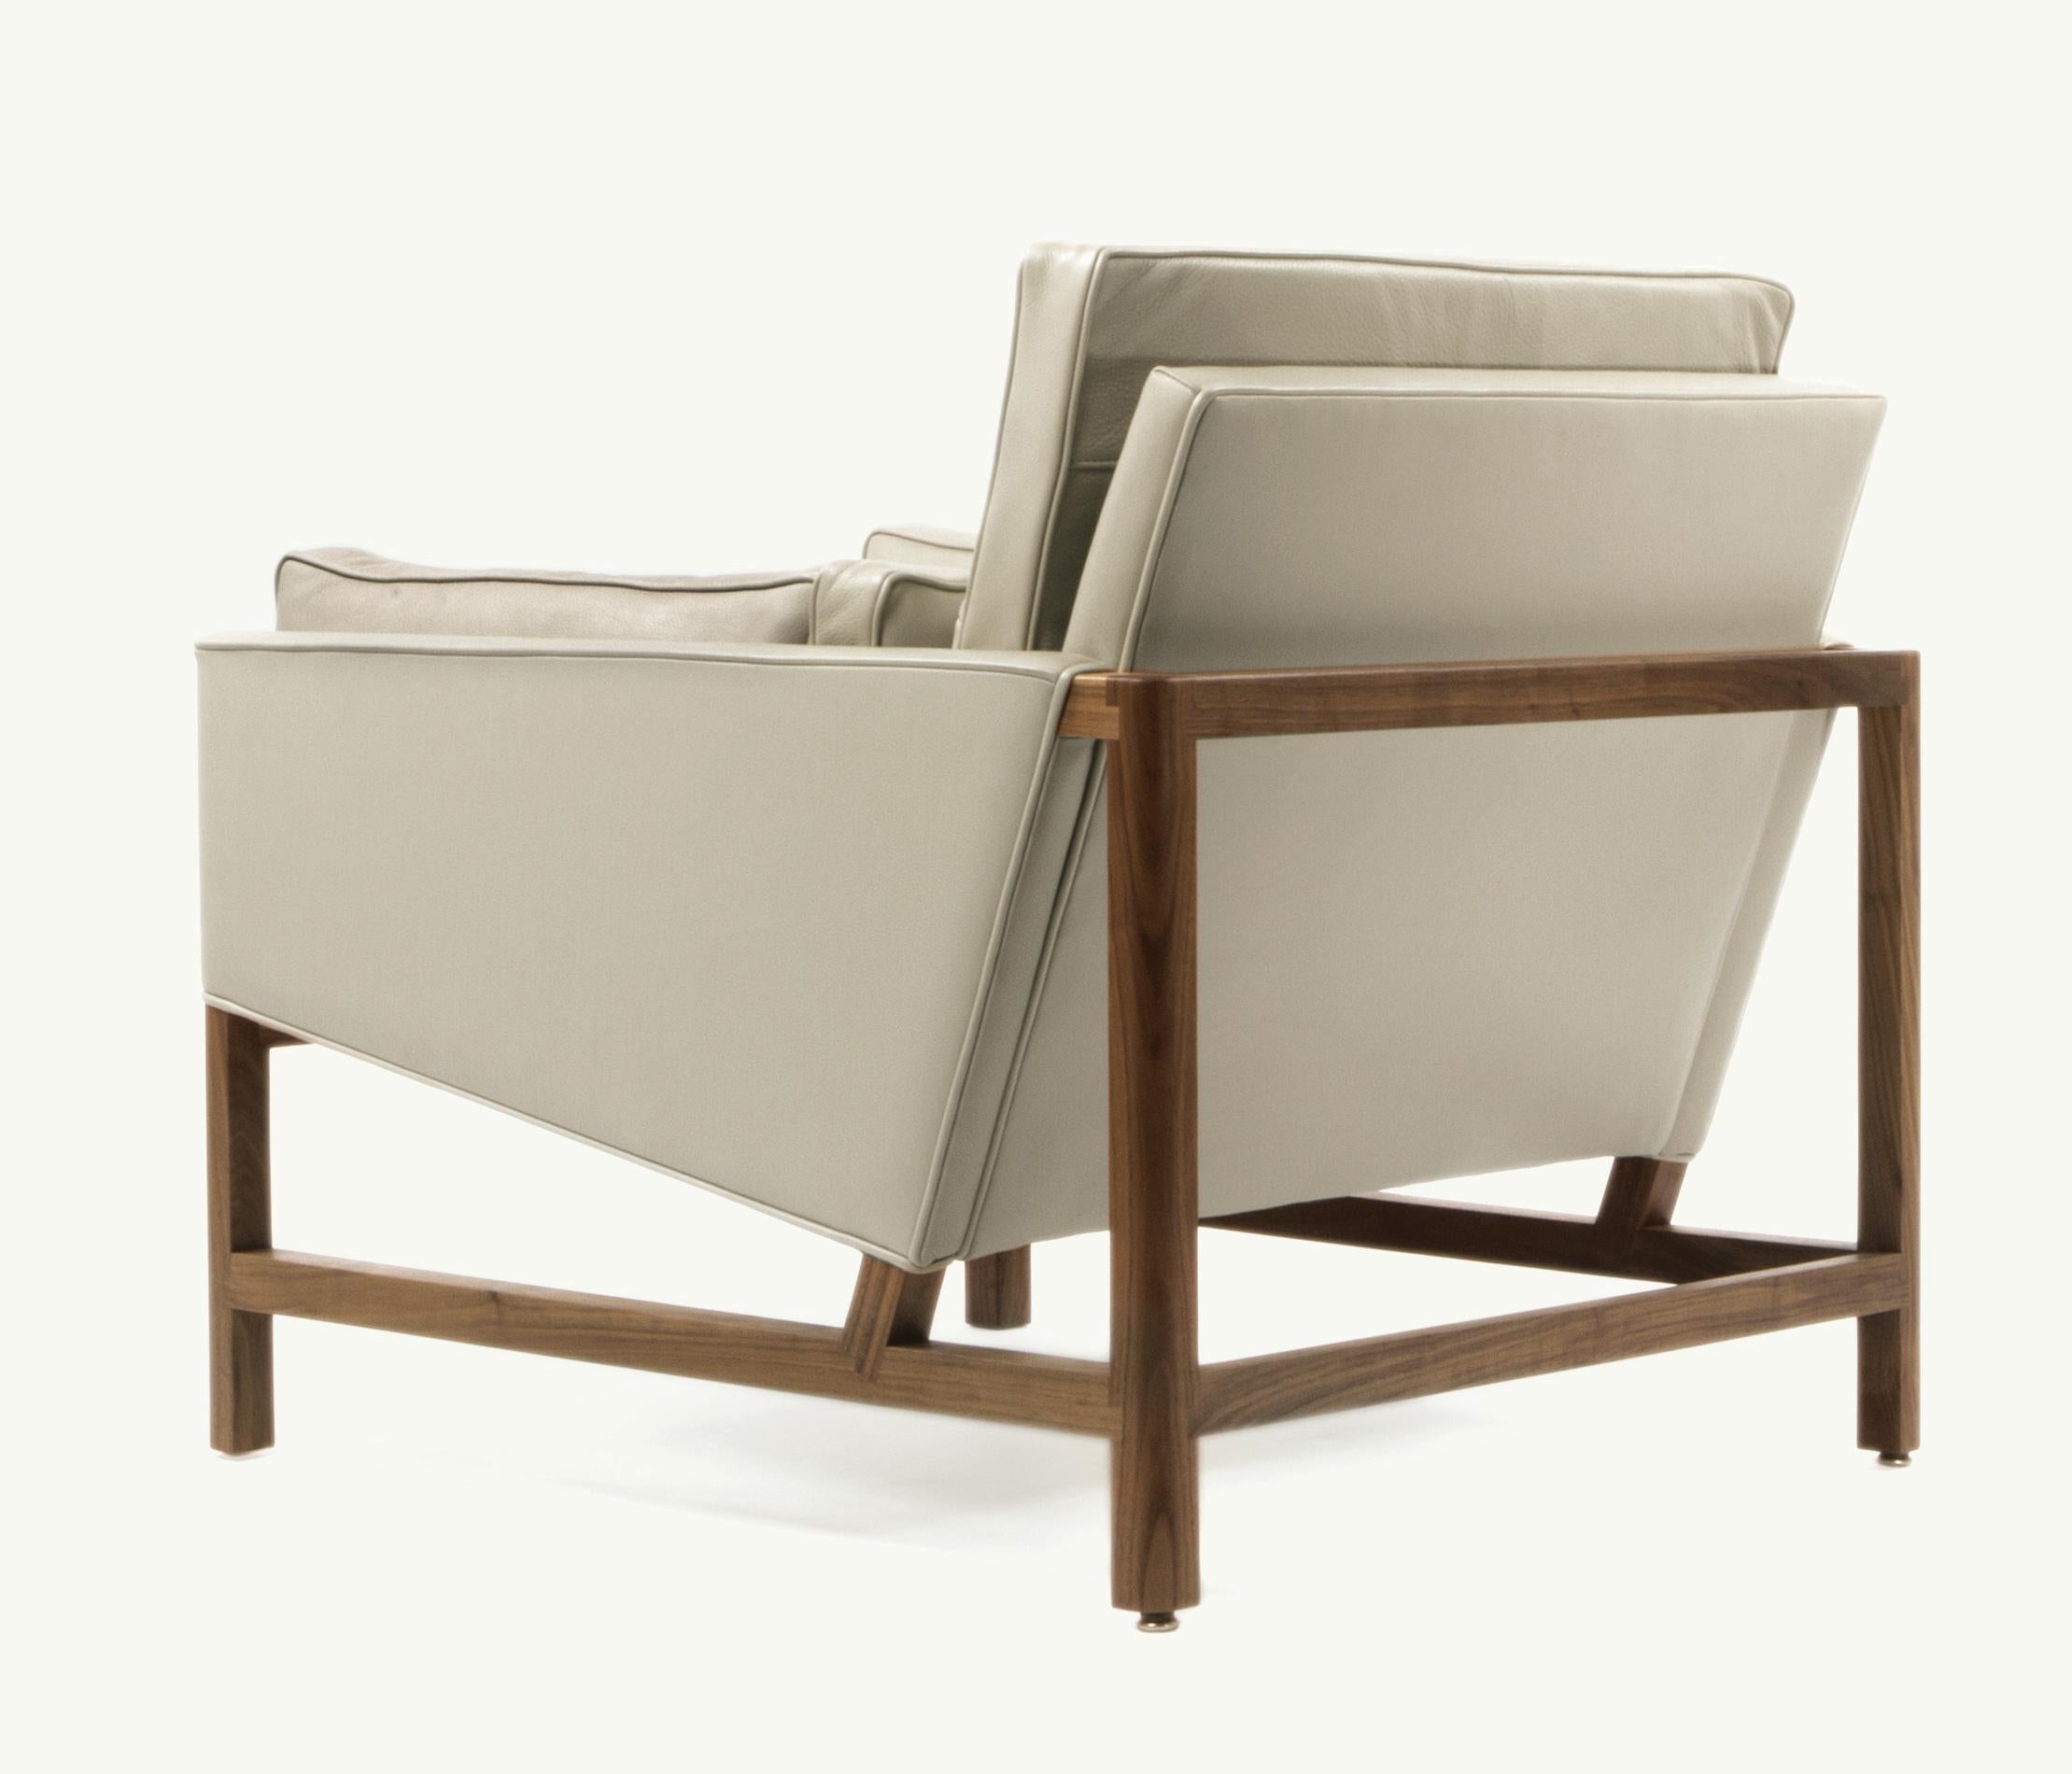 For Sale: Gray (Comfort 12114 Gray Beige) Wood Frame Low Back Lounge Chair in Walnut and Leather Designed by Craig Bassam 2